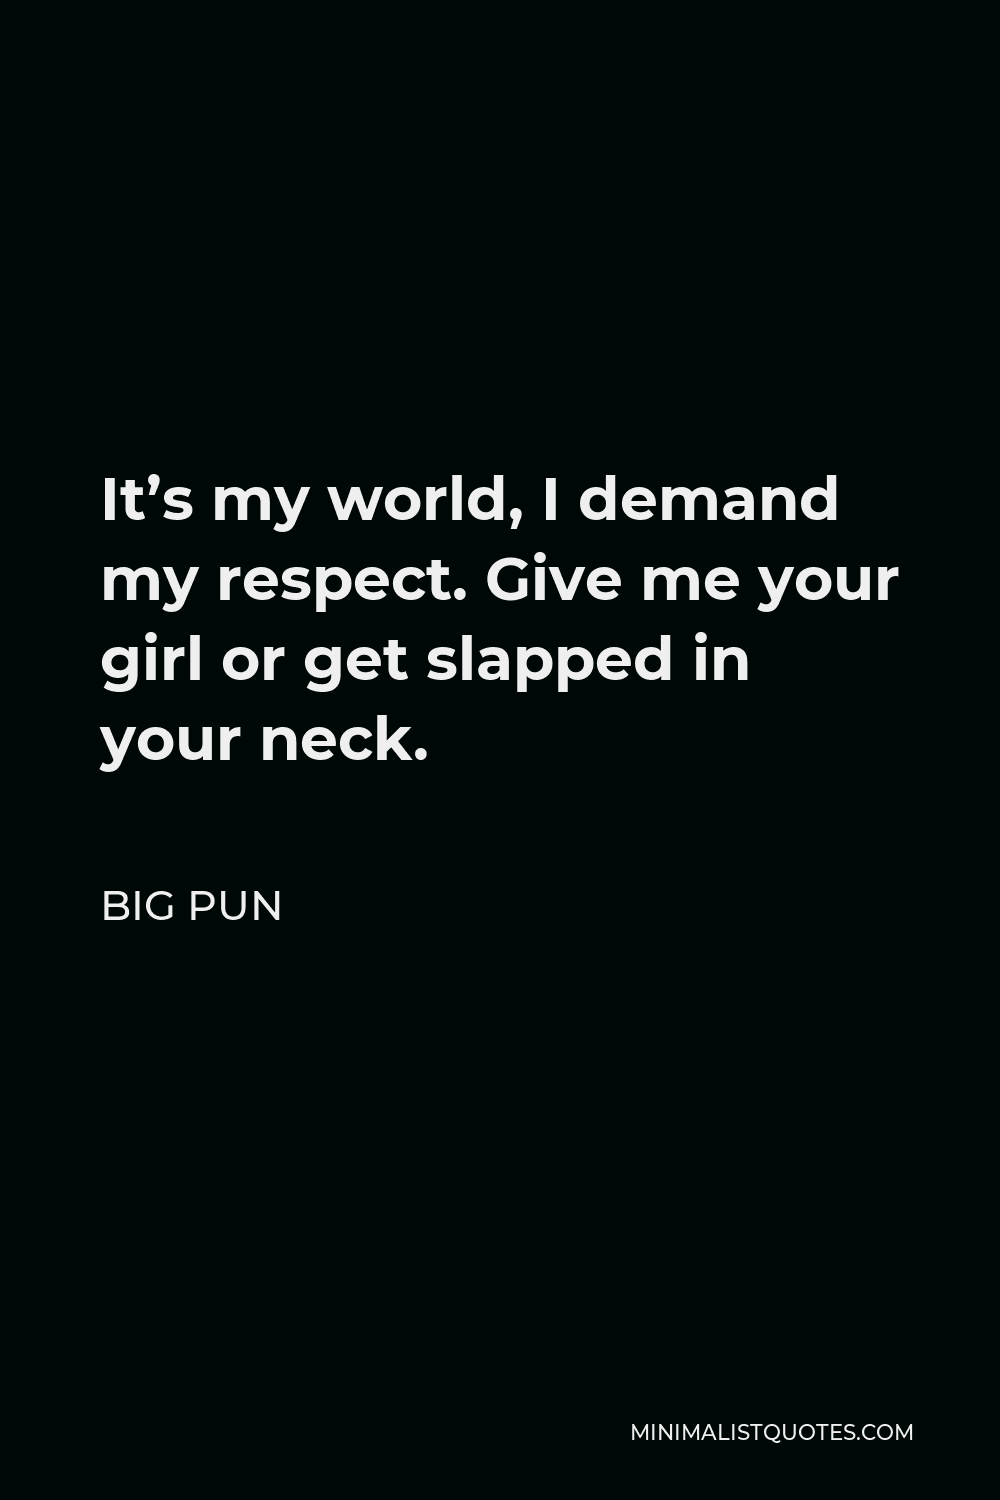 Big Pun Quote - It’s my world, I demand my respect. Give me your girl or get slapped in your neck.